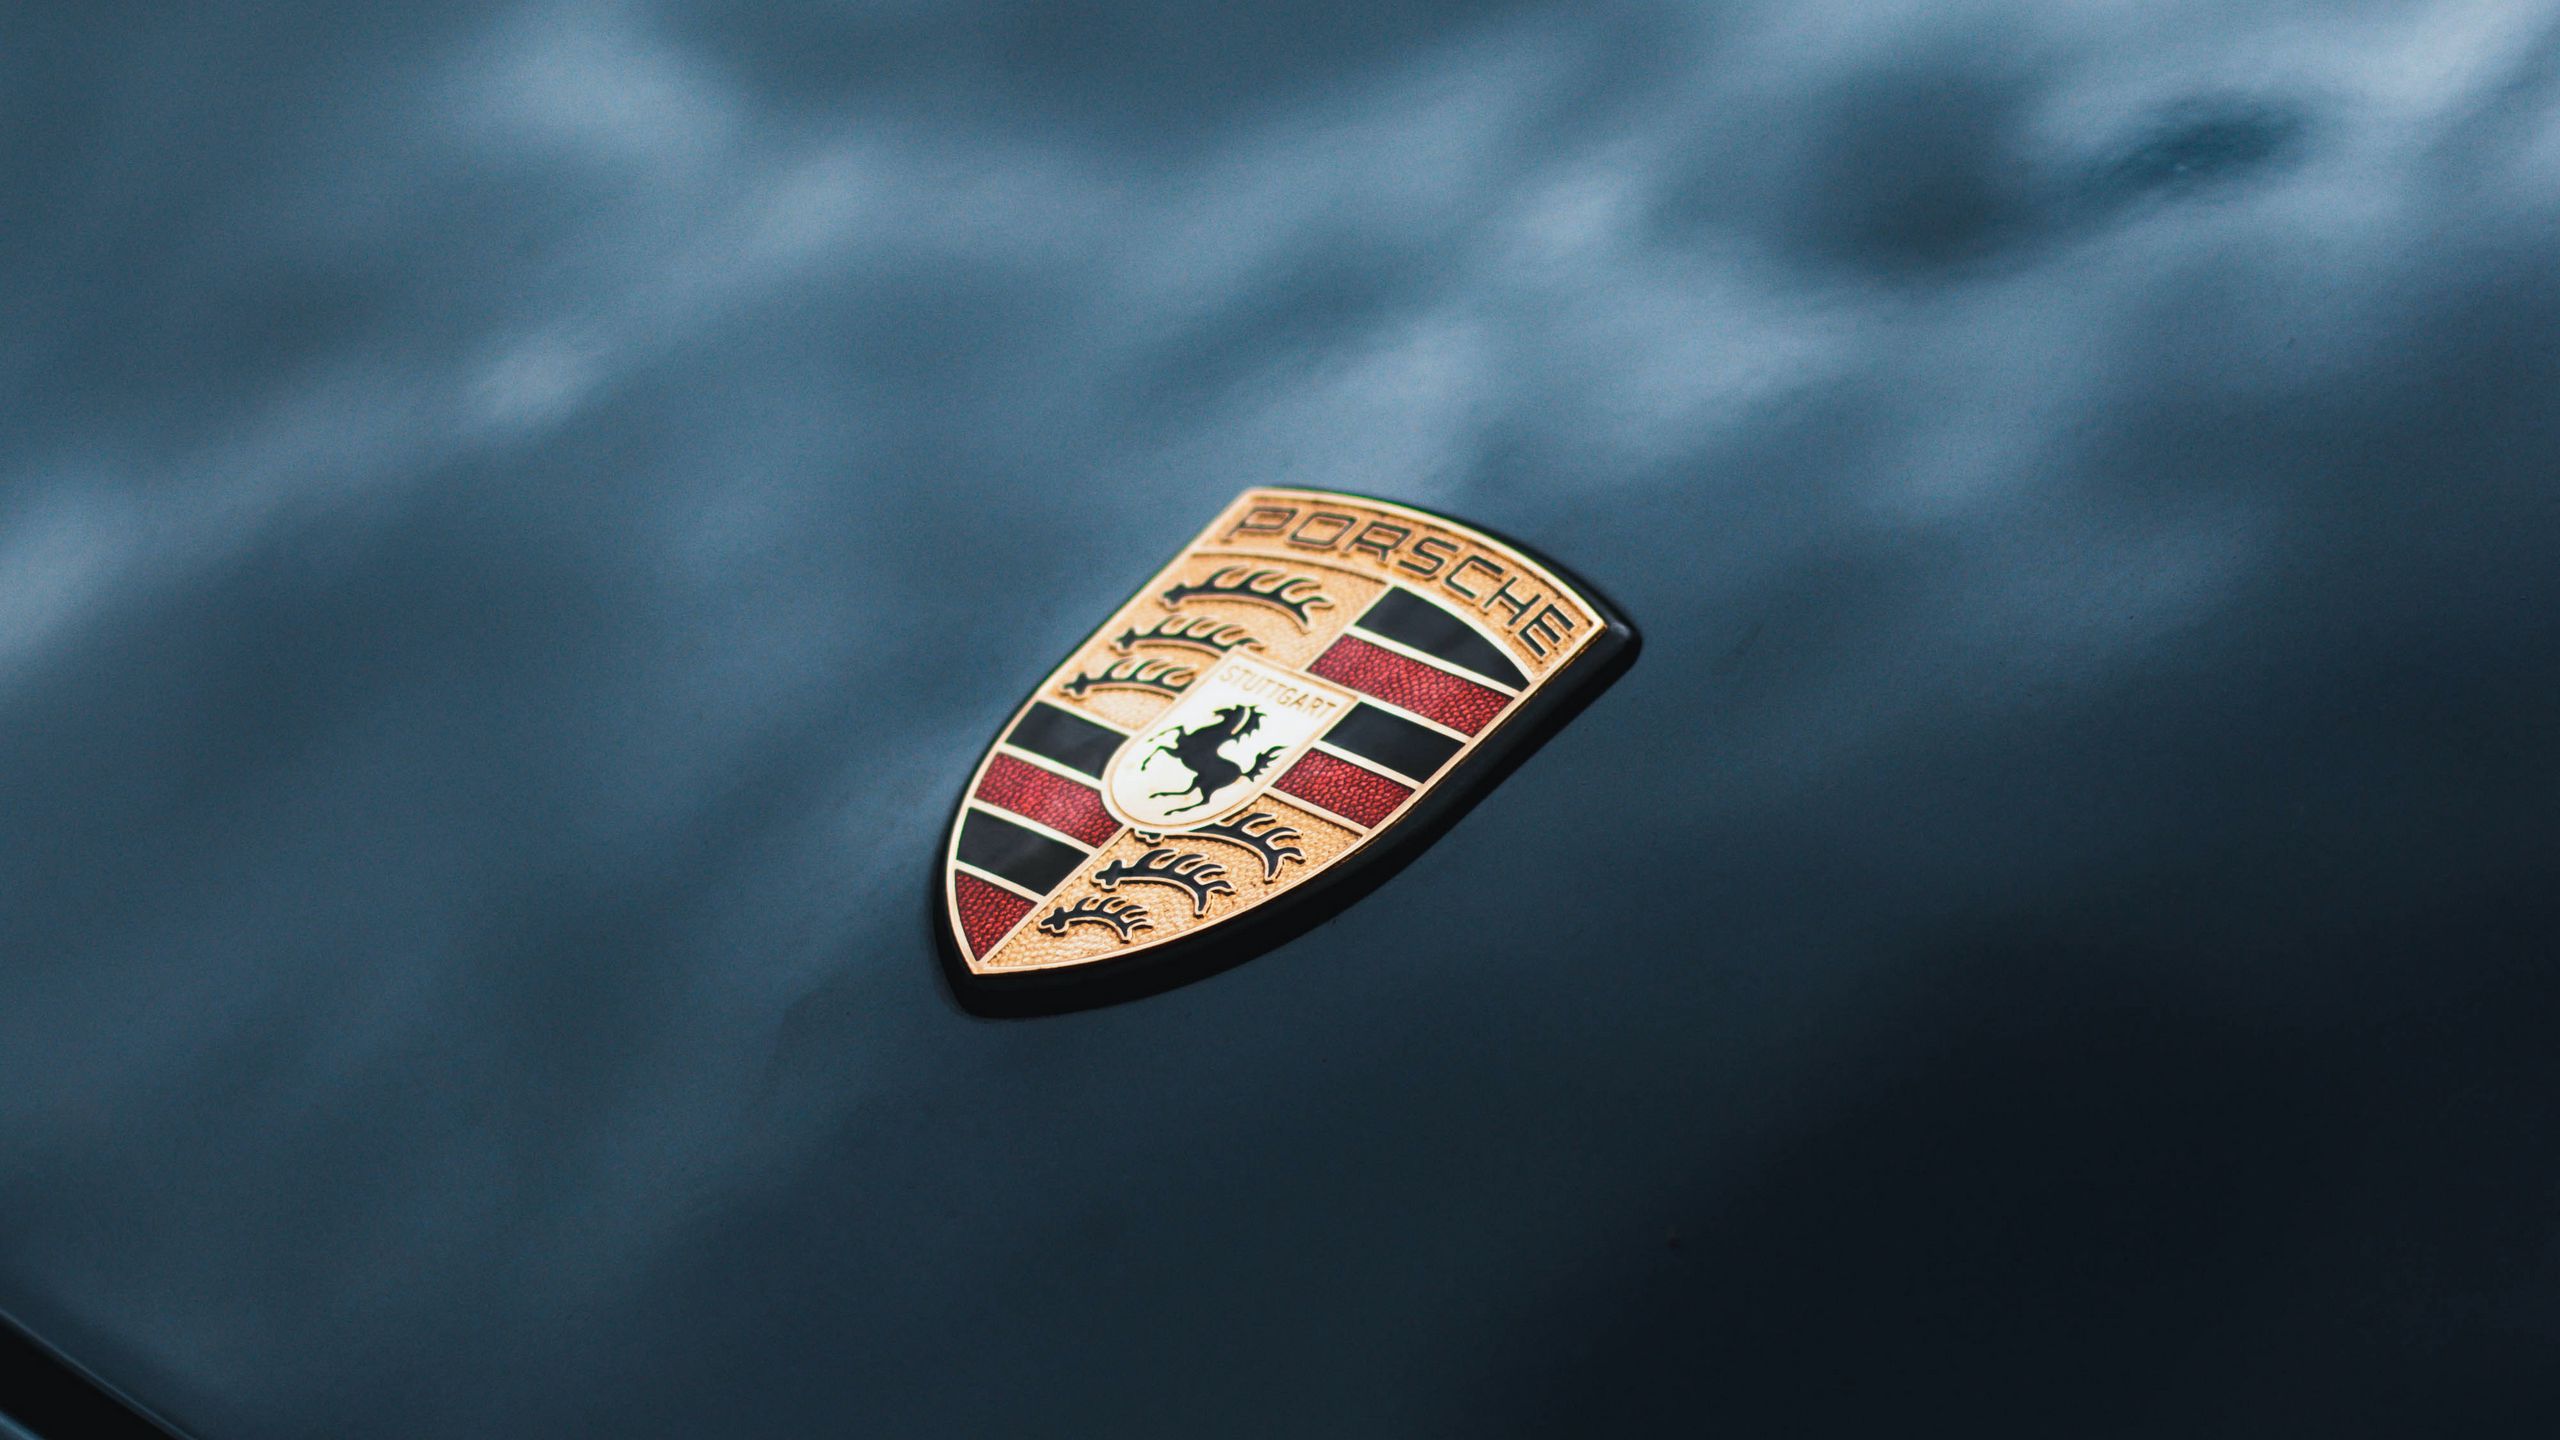 In case you need new iPhone wallpaper : r/Porsche